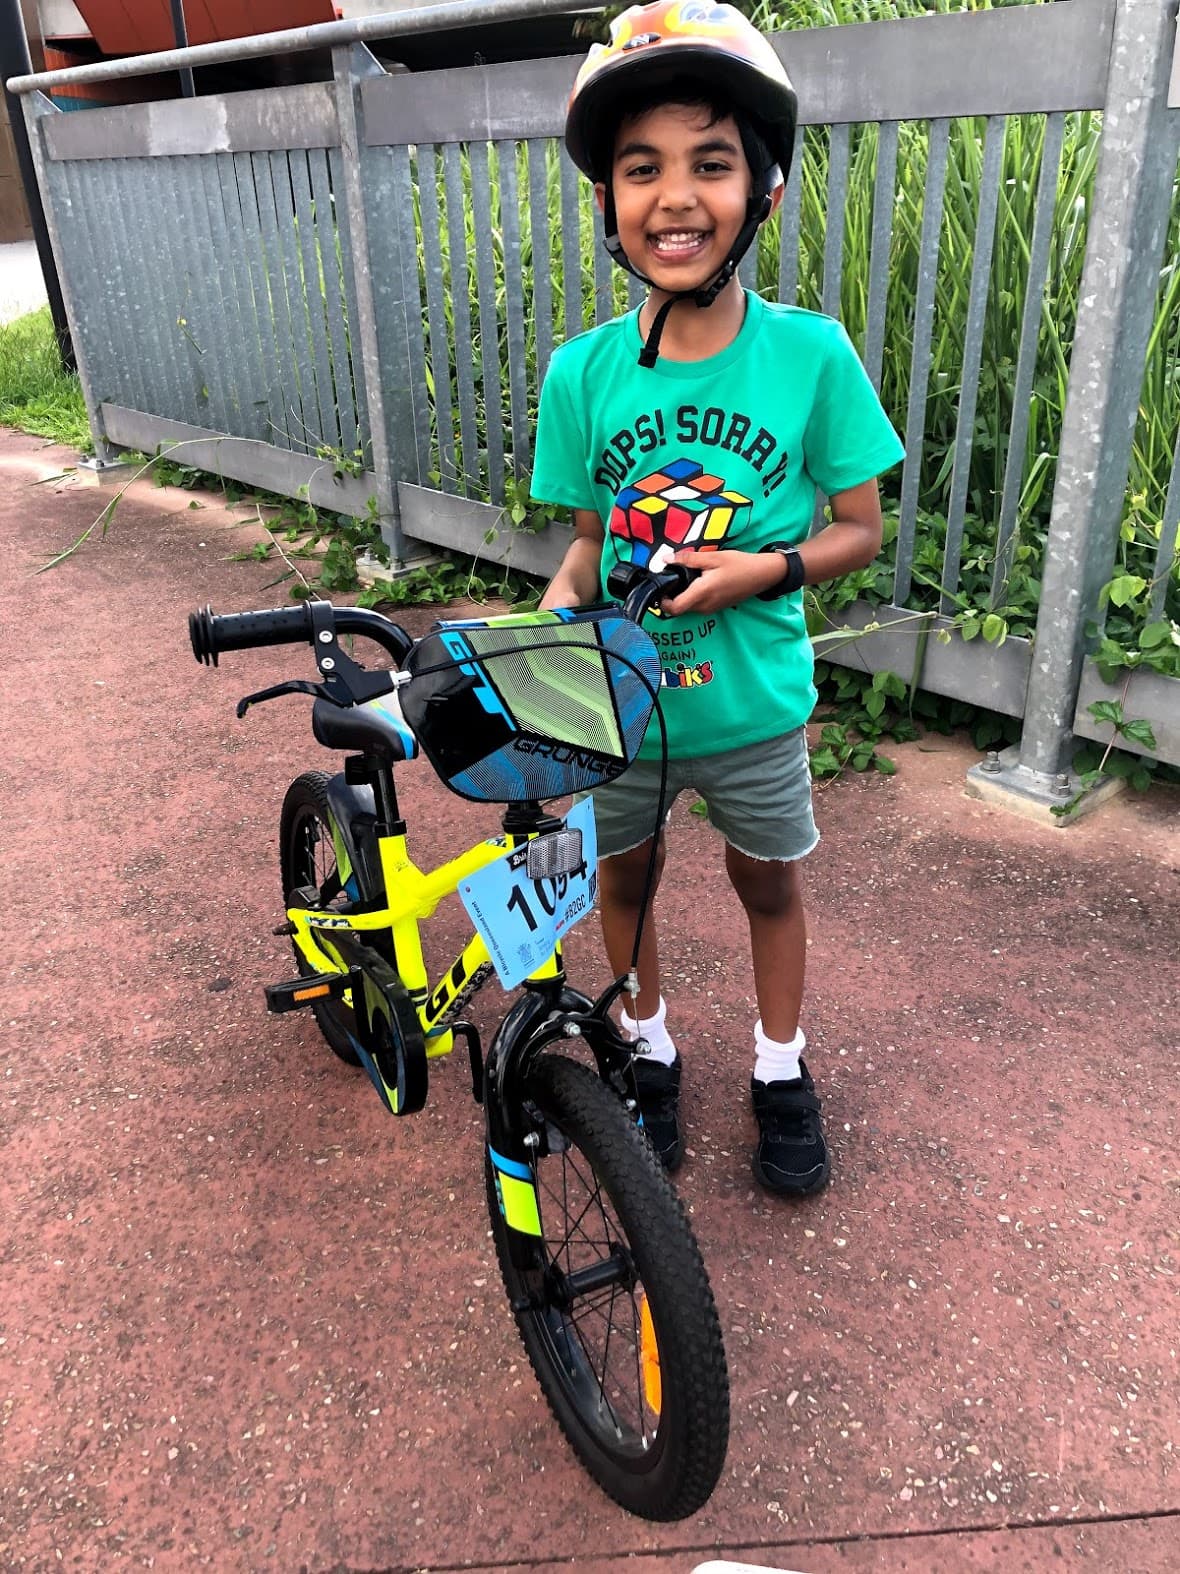 Gautham with his cycle, happy that he can ride on his own